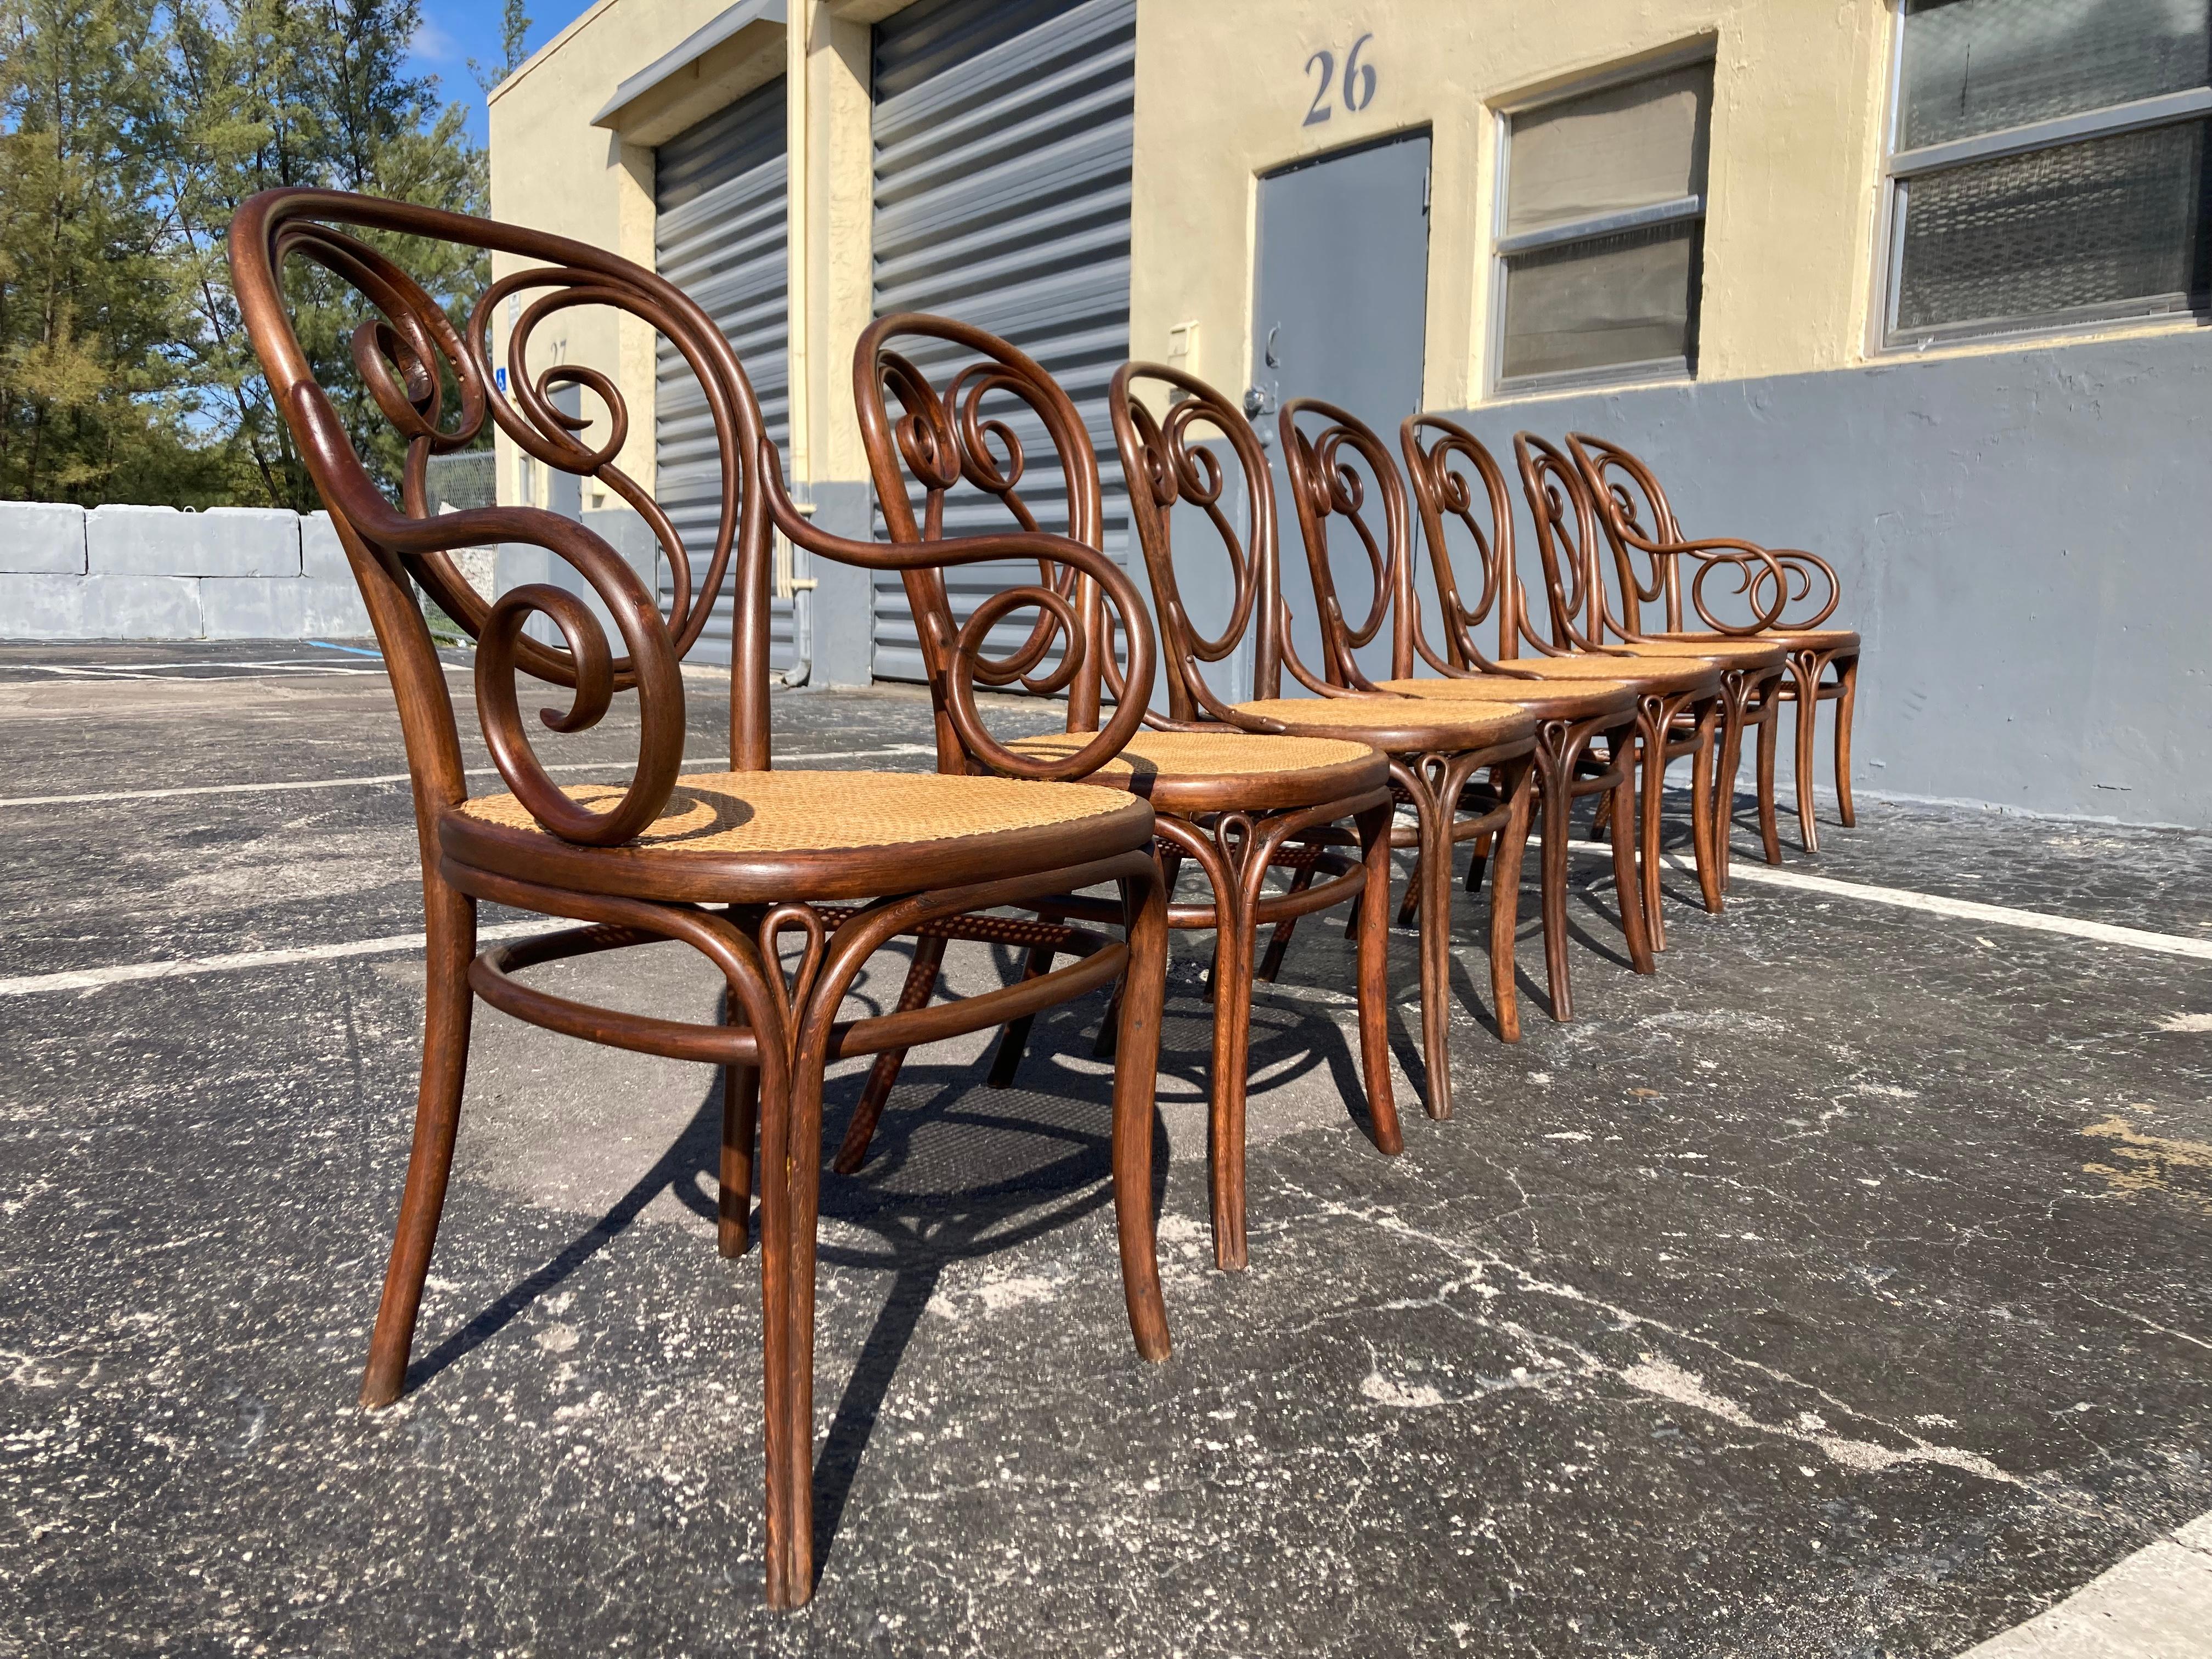 One of the rarest Thonet chairs, model 13. Set of seven, two arm and five side chairs. Very rare chairs due to the high production cost, these chairs are most likely from 1893. The arm chairs are 23.25” wide, 38” high and 22” deep.